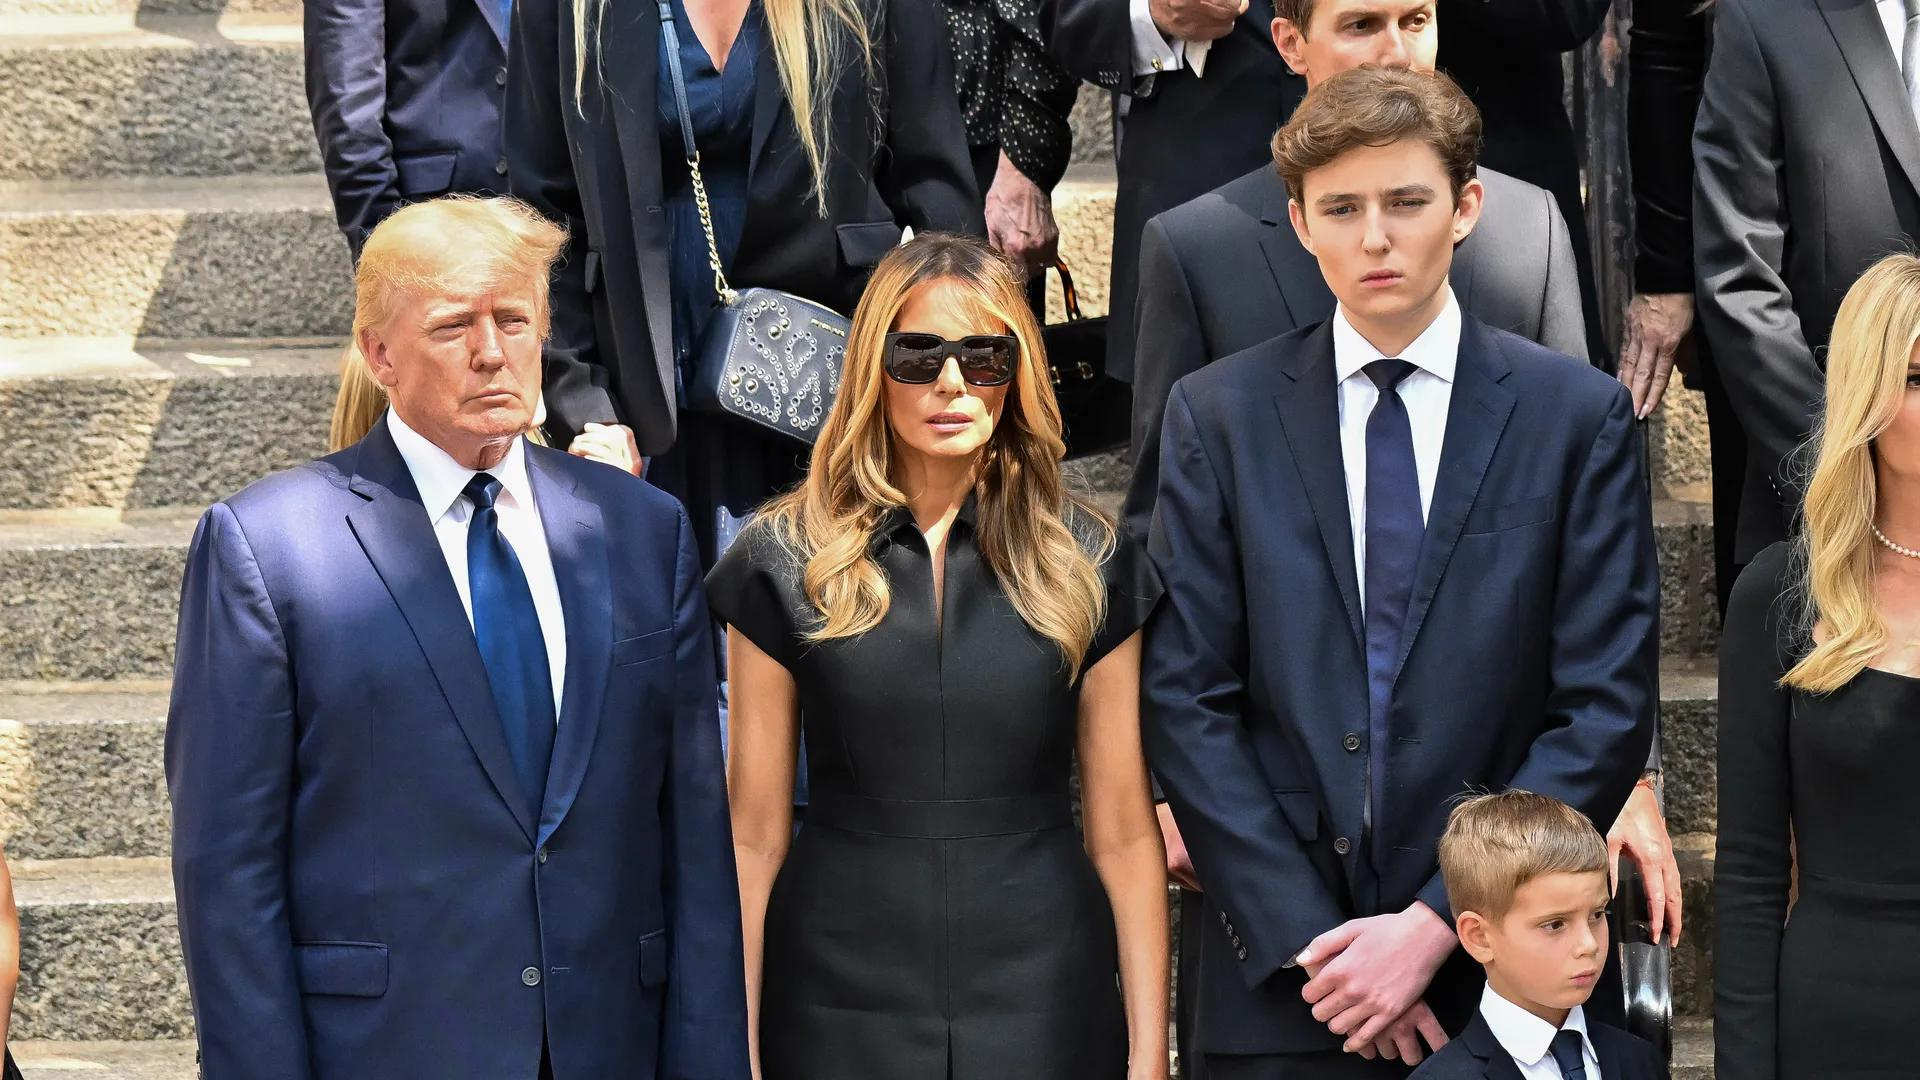 Donald Trump Says He Hates Being Pictured With Youngest Son Barron. Here’s Why